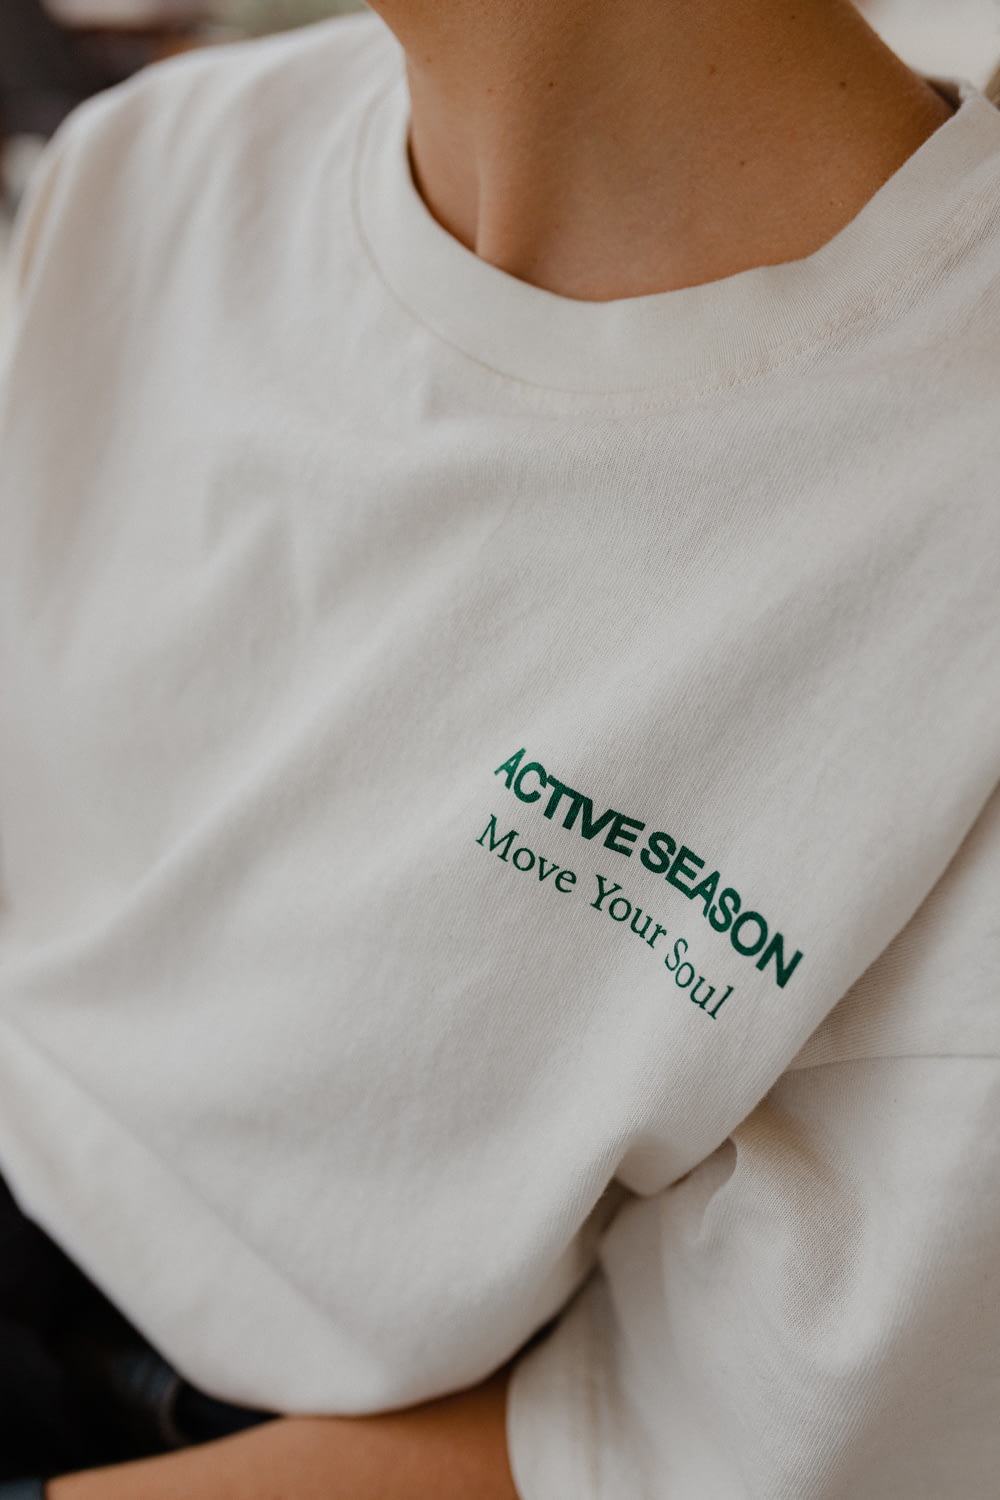 a person wearing a white shirt with green text on it